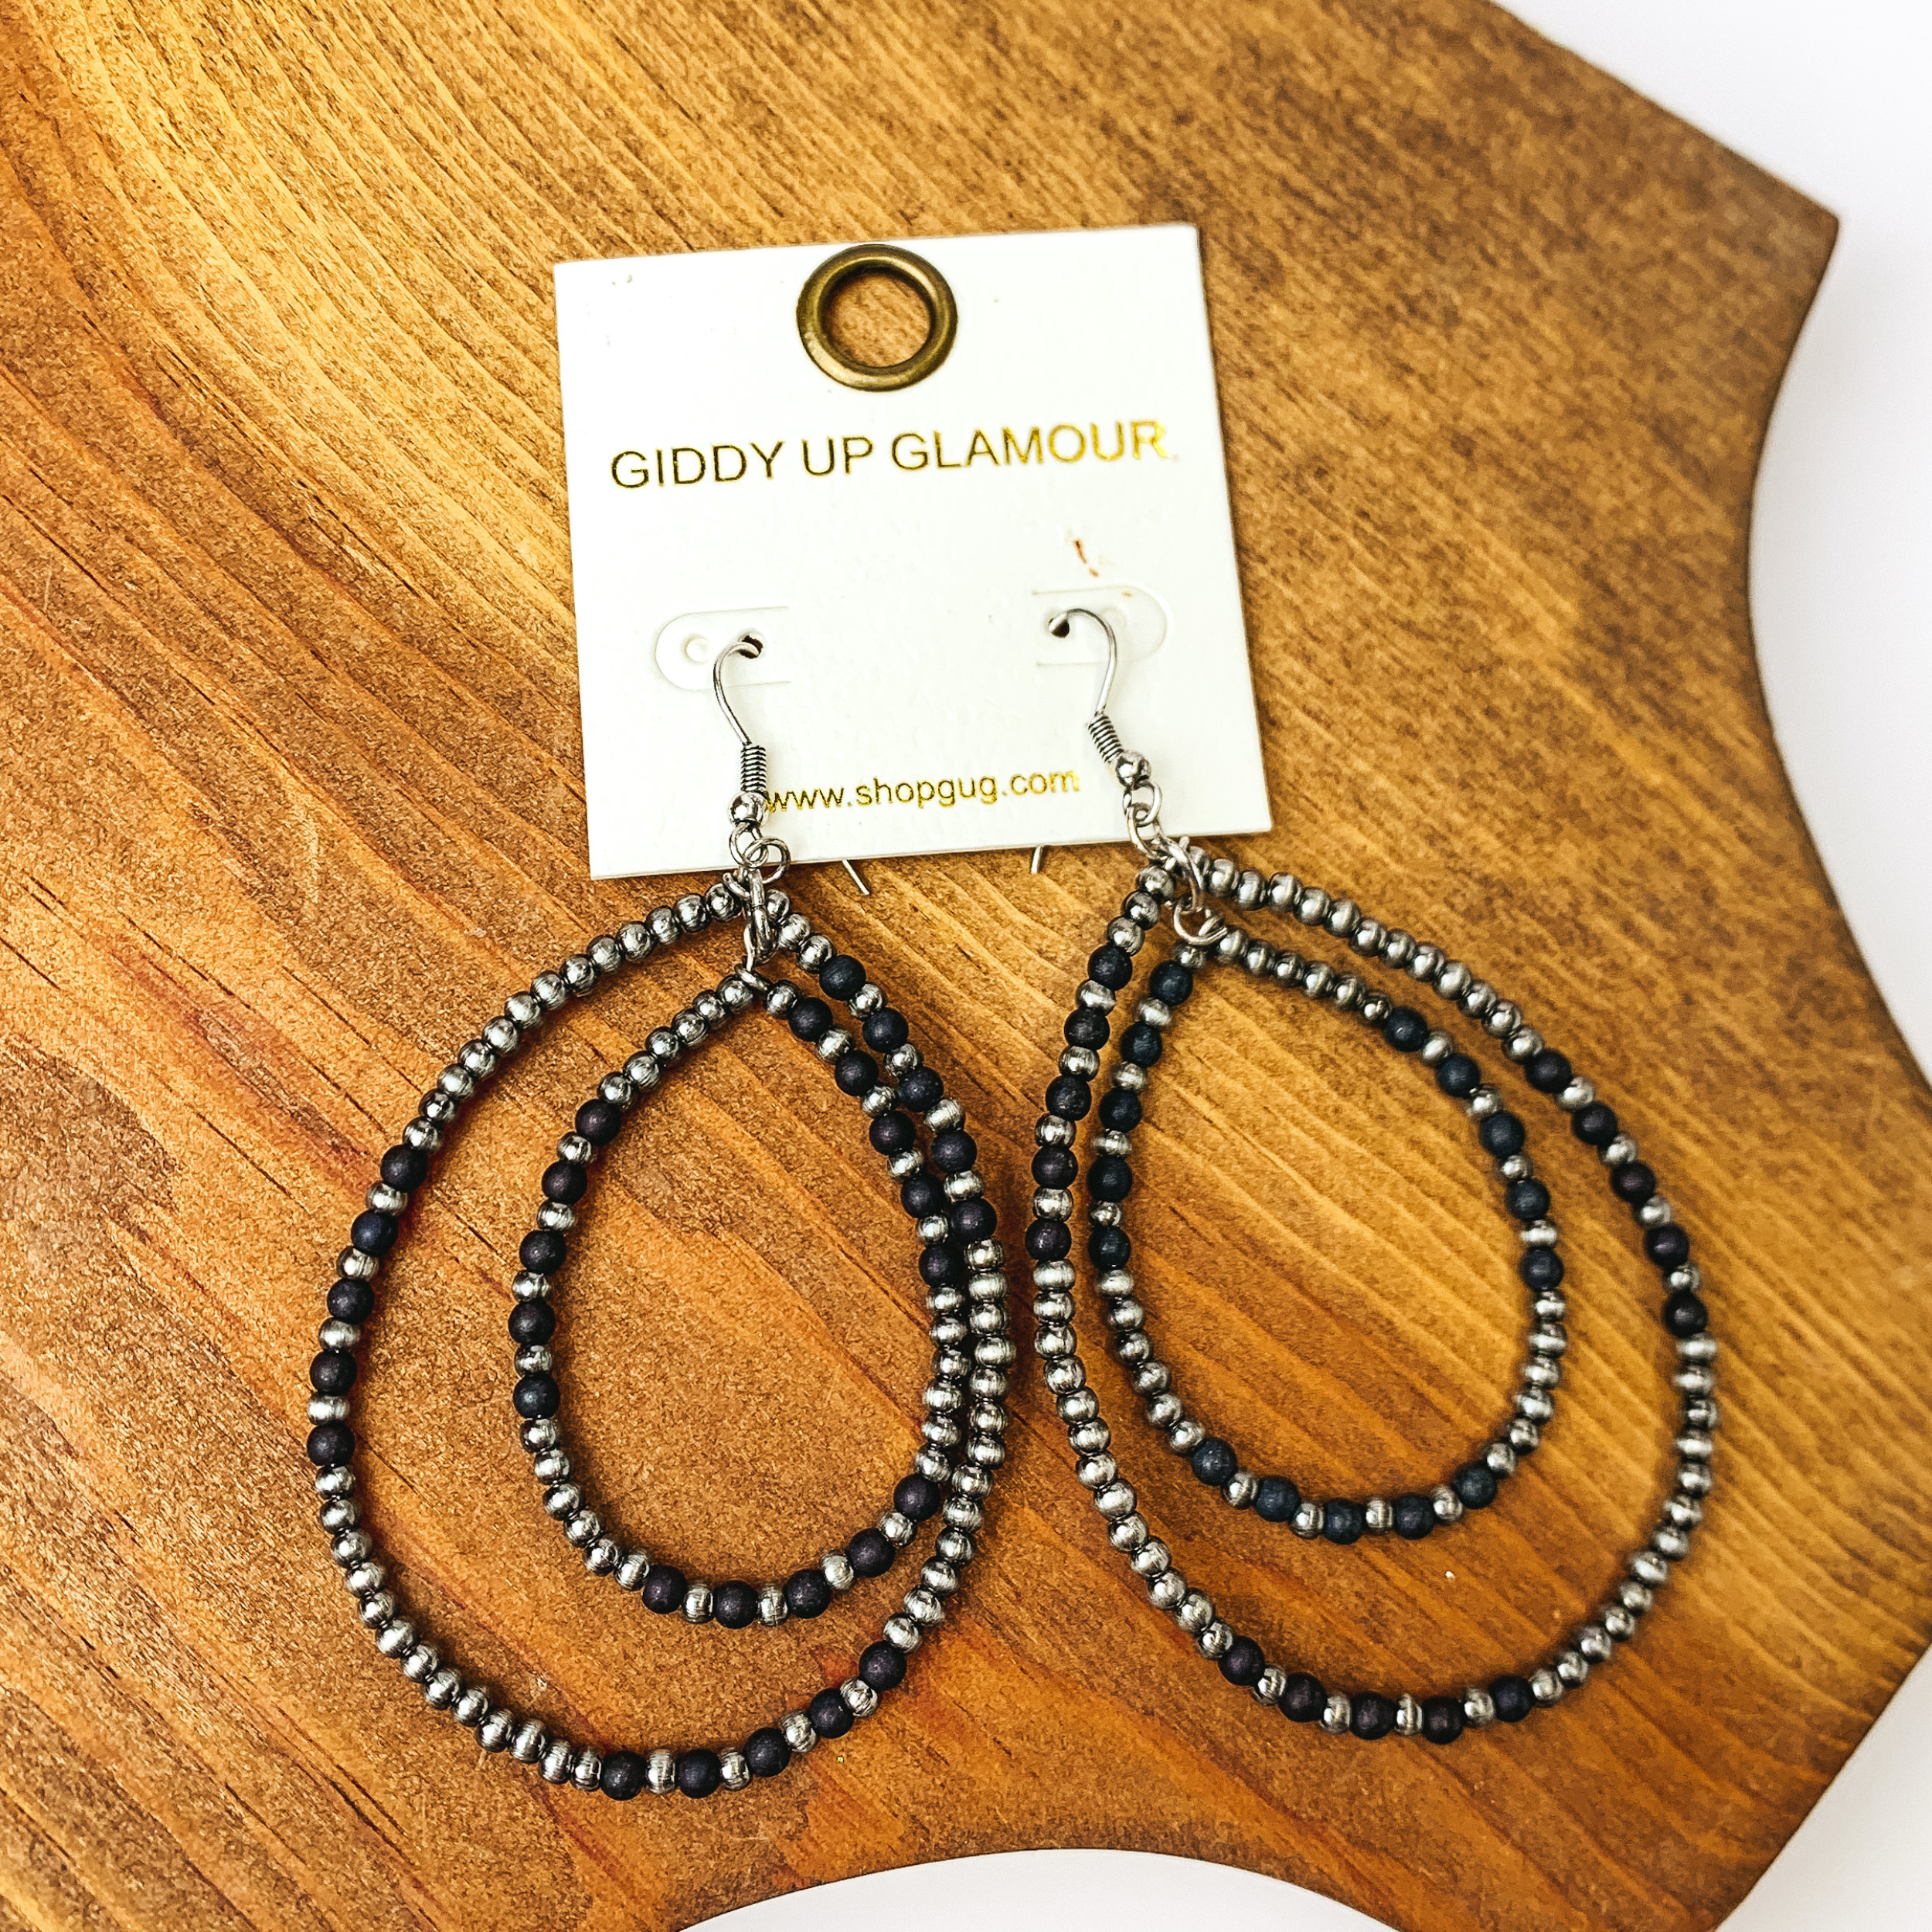 Beaded Double Drop Earrings in Silver Tone and Black. Pictured on wood piece.